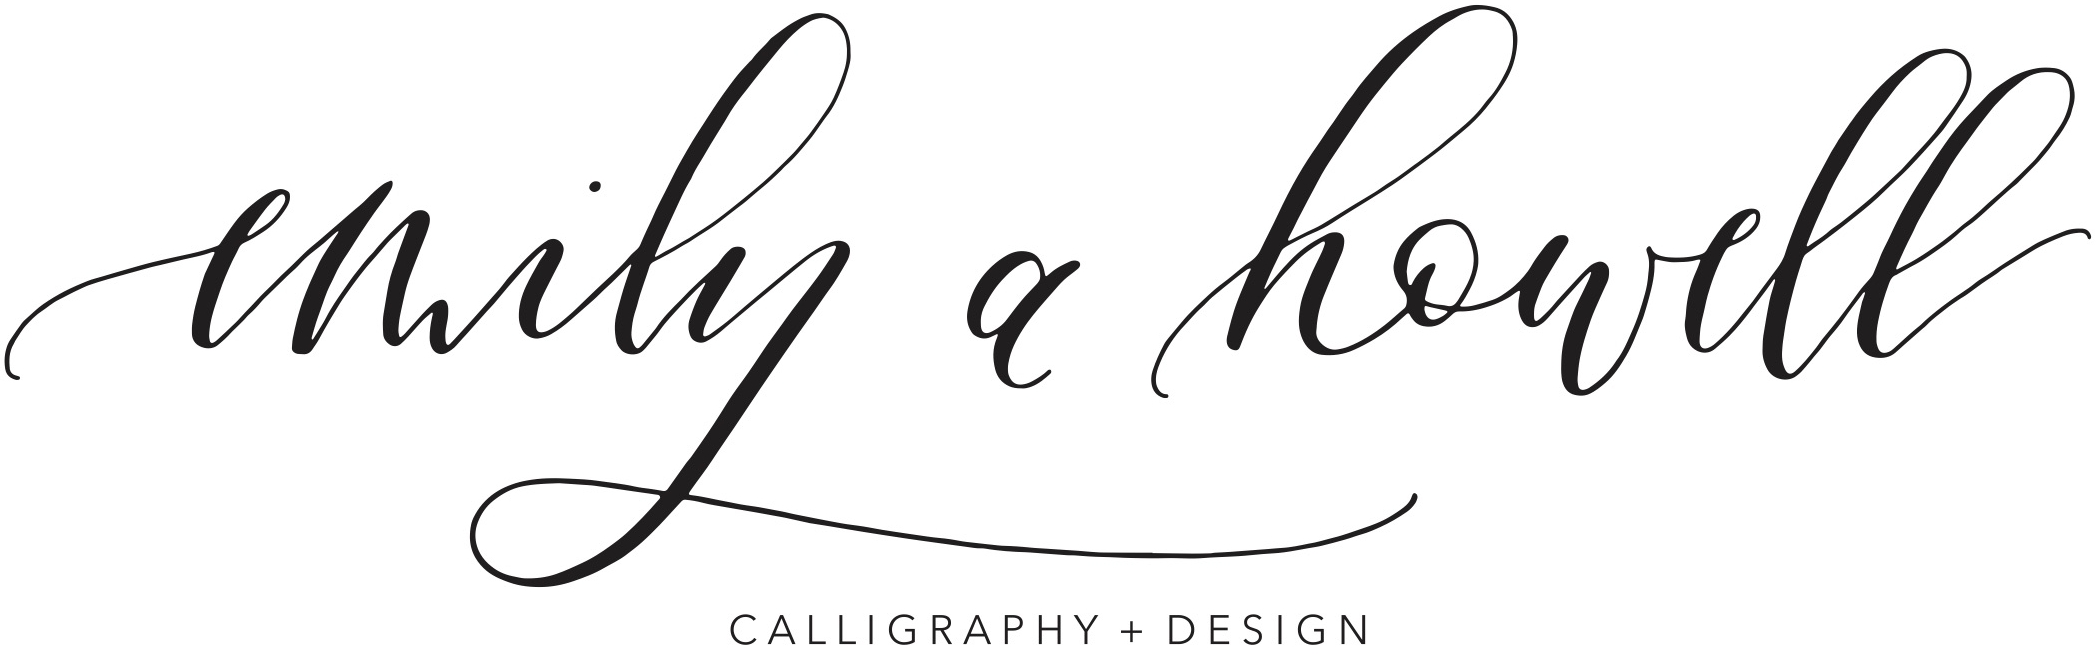 MODERN CALLIGRAPHY WORKBOOK - FAUXLIGRAPHY — Emily A Howell Calligraphy +  Design